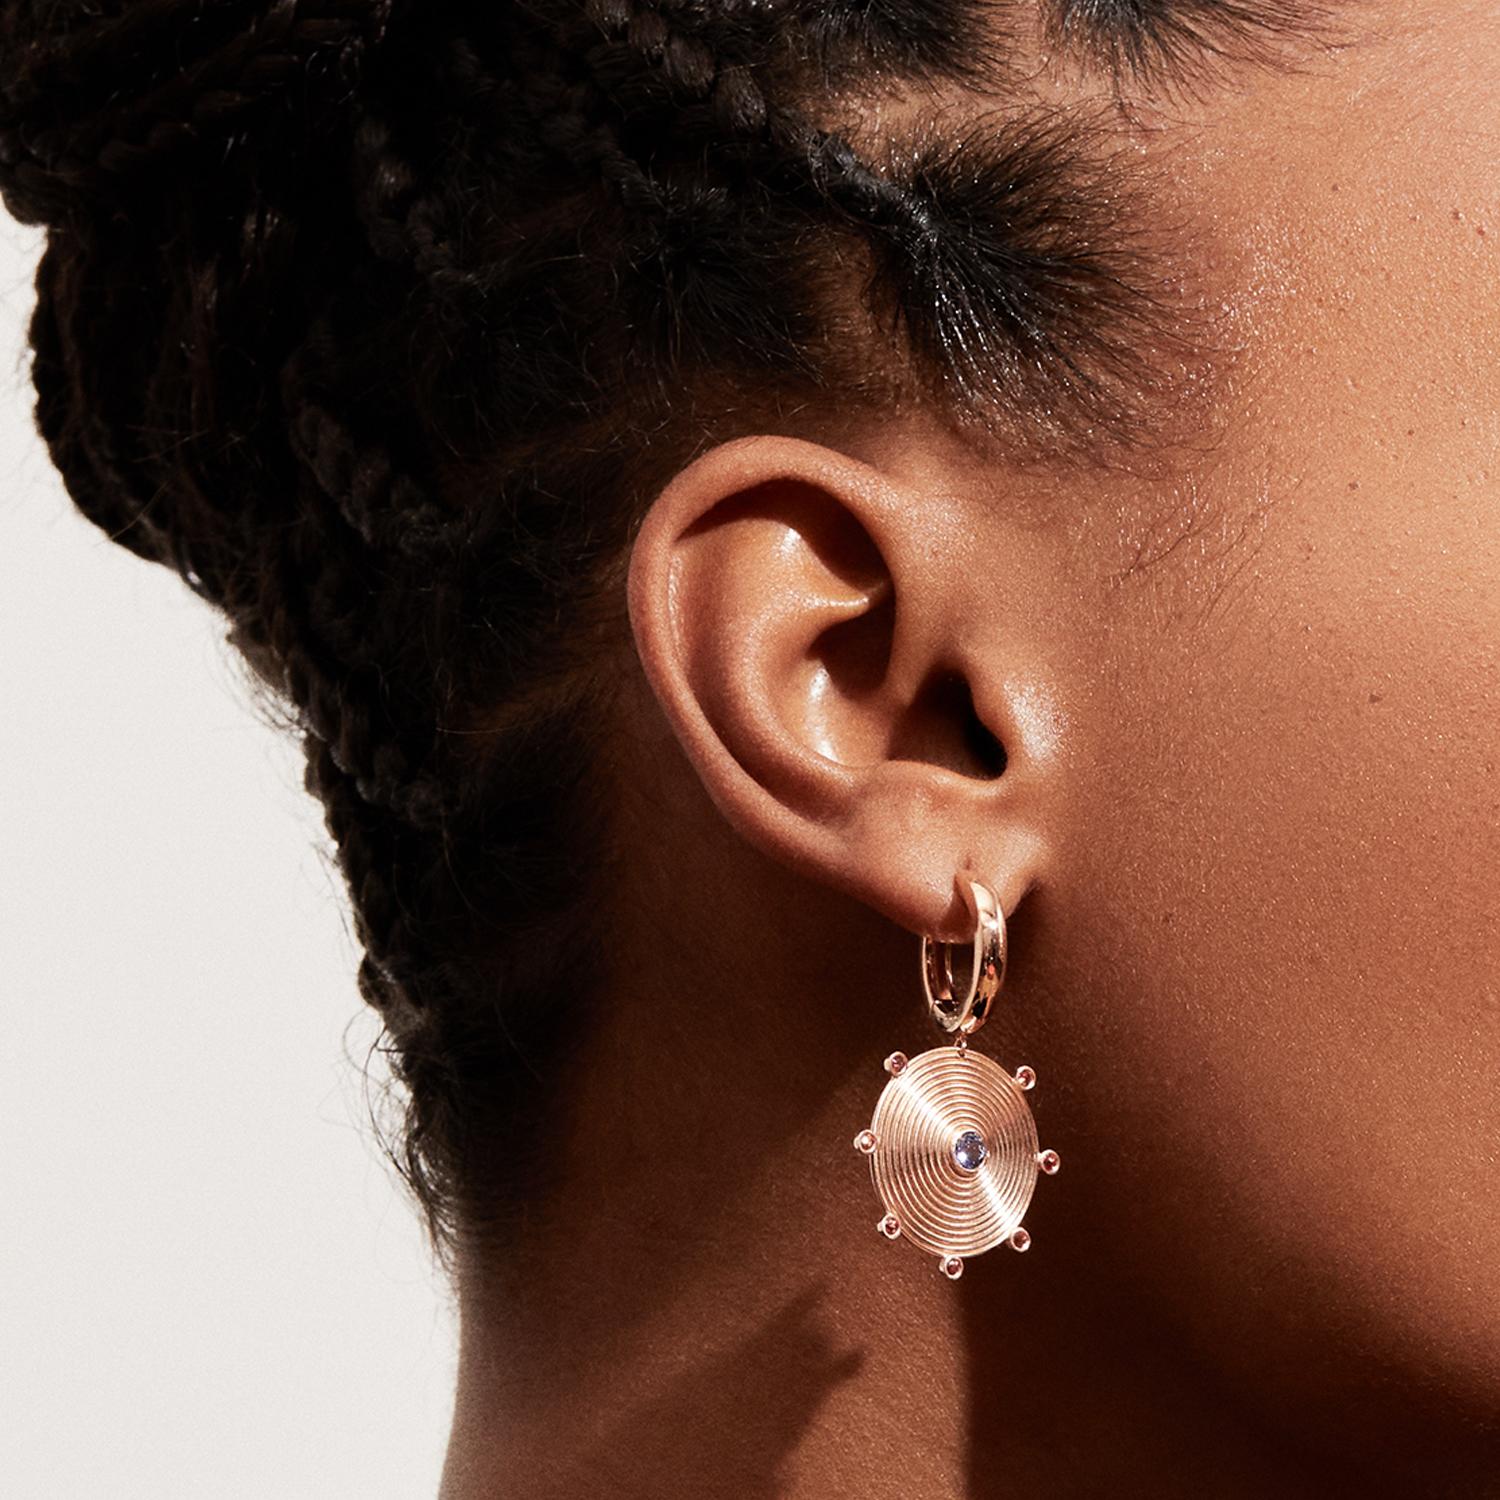 Our Ingrid Earrings are a versatile hoop & drop earring hybrid - the best of both worlds. Featuring a perfectly proportioned spiral rendered in gold, it's one of the oldest universal symbols representing themes of change, growth, and evolution. Ours